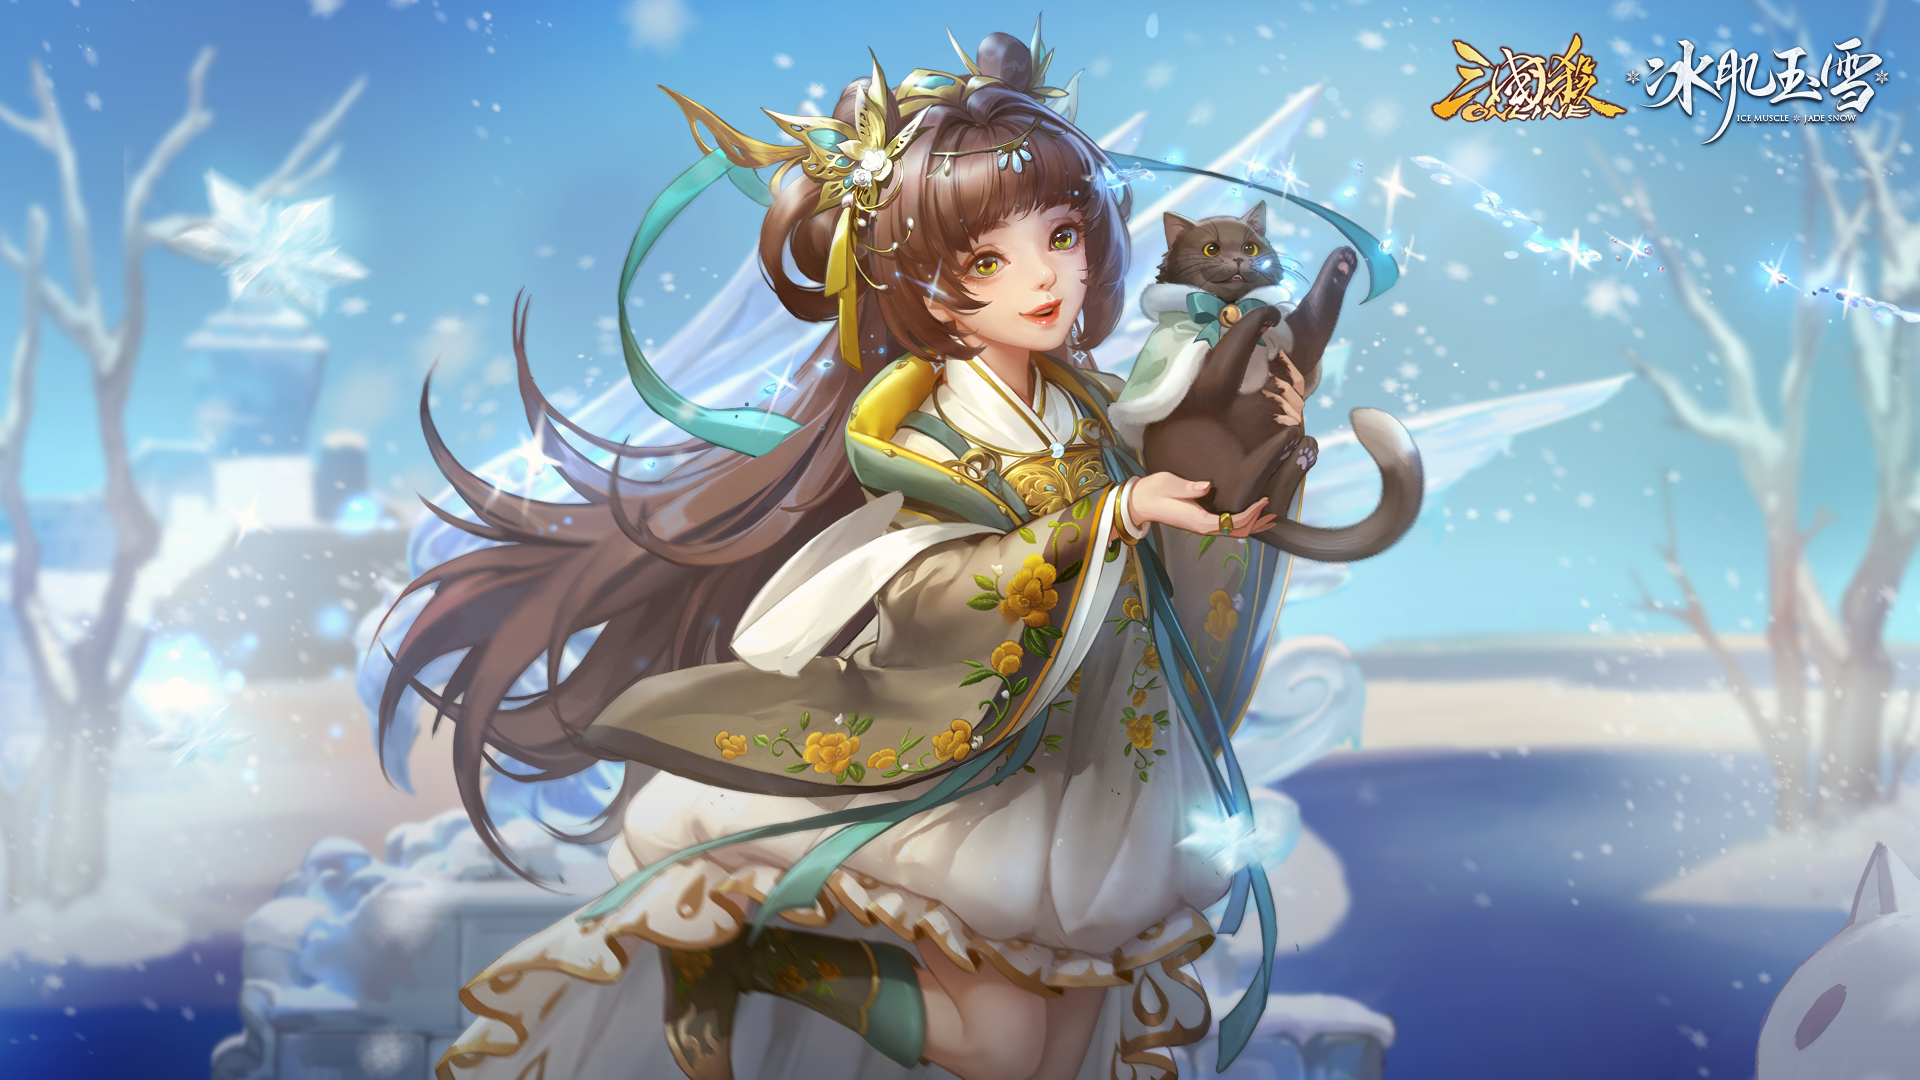 Three Kingdoms Game Characters Video Game Girls Video Game Art Artwork Cats Animals 1920x1080